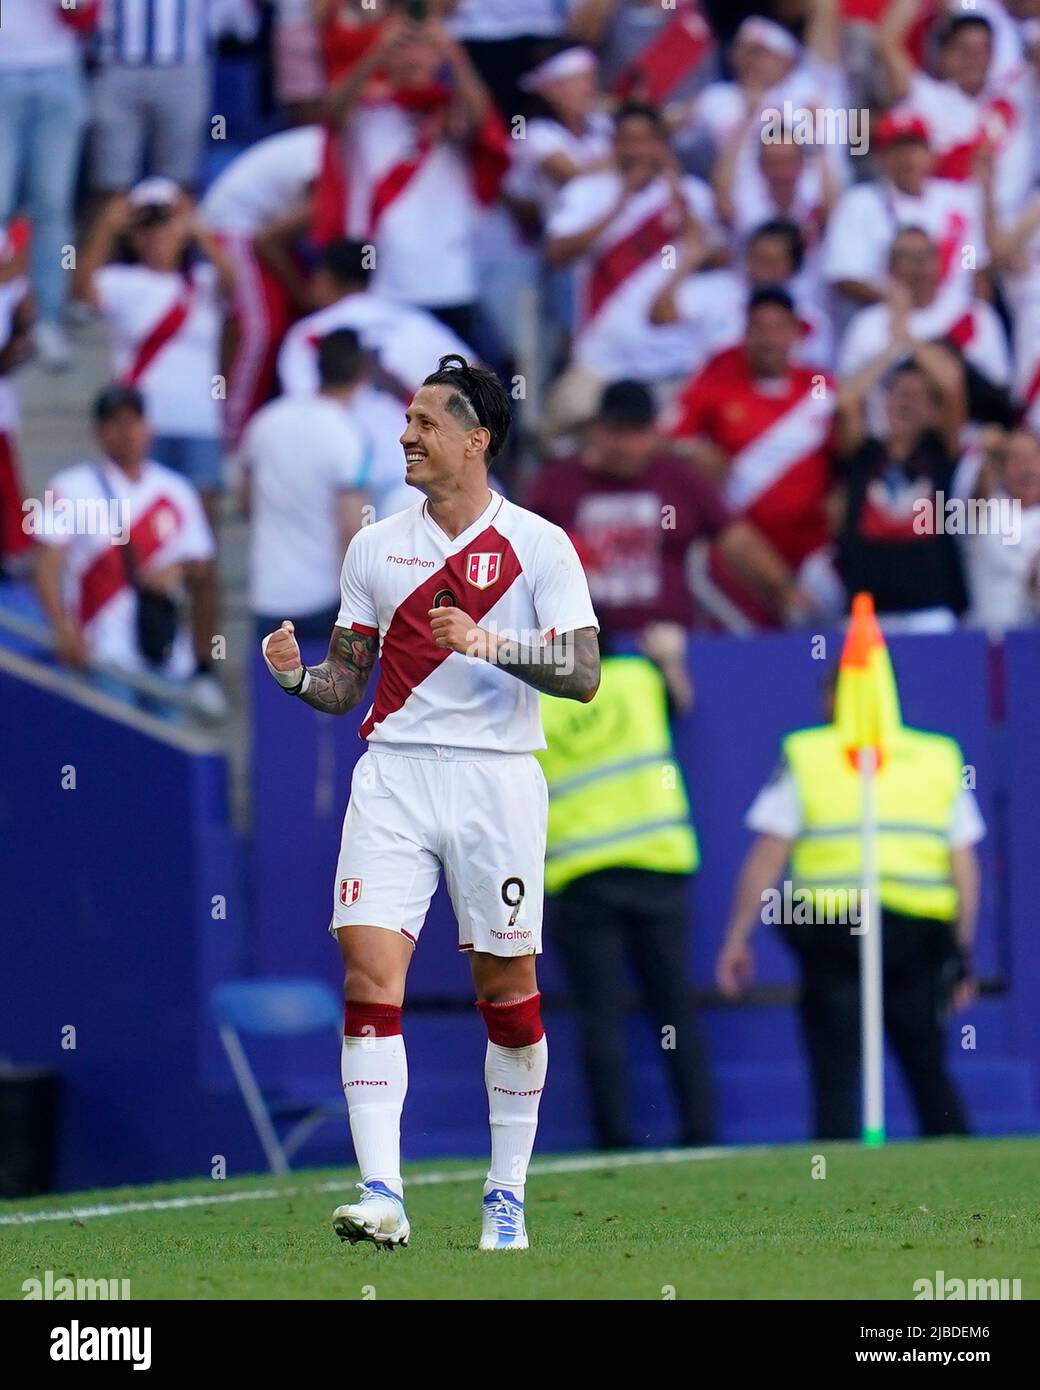 Barcelona, Spain. June 5, 2022, Gianluca Lapadula of Peru celebrates after scoring the 1-0 during the friendly match between Peru and New Zealand played at RCDE Stadium on June 5, 2022 in Barcelona, Spain. (Photo by Bagu Blanco / PRESSINPHOTO) Stock Photo